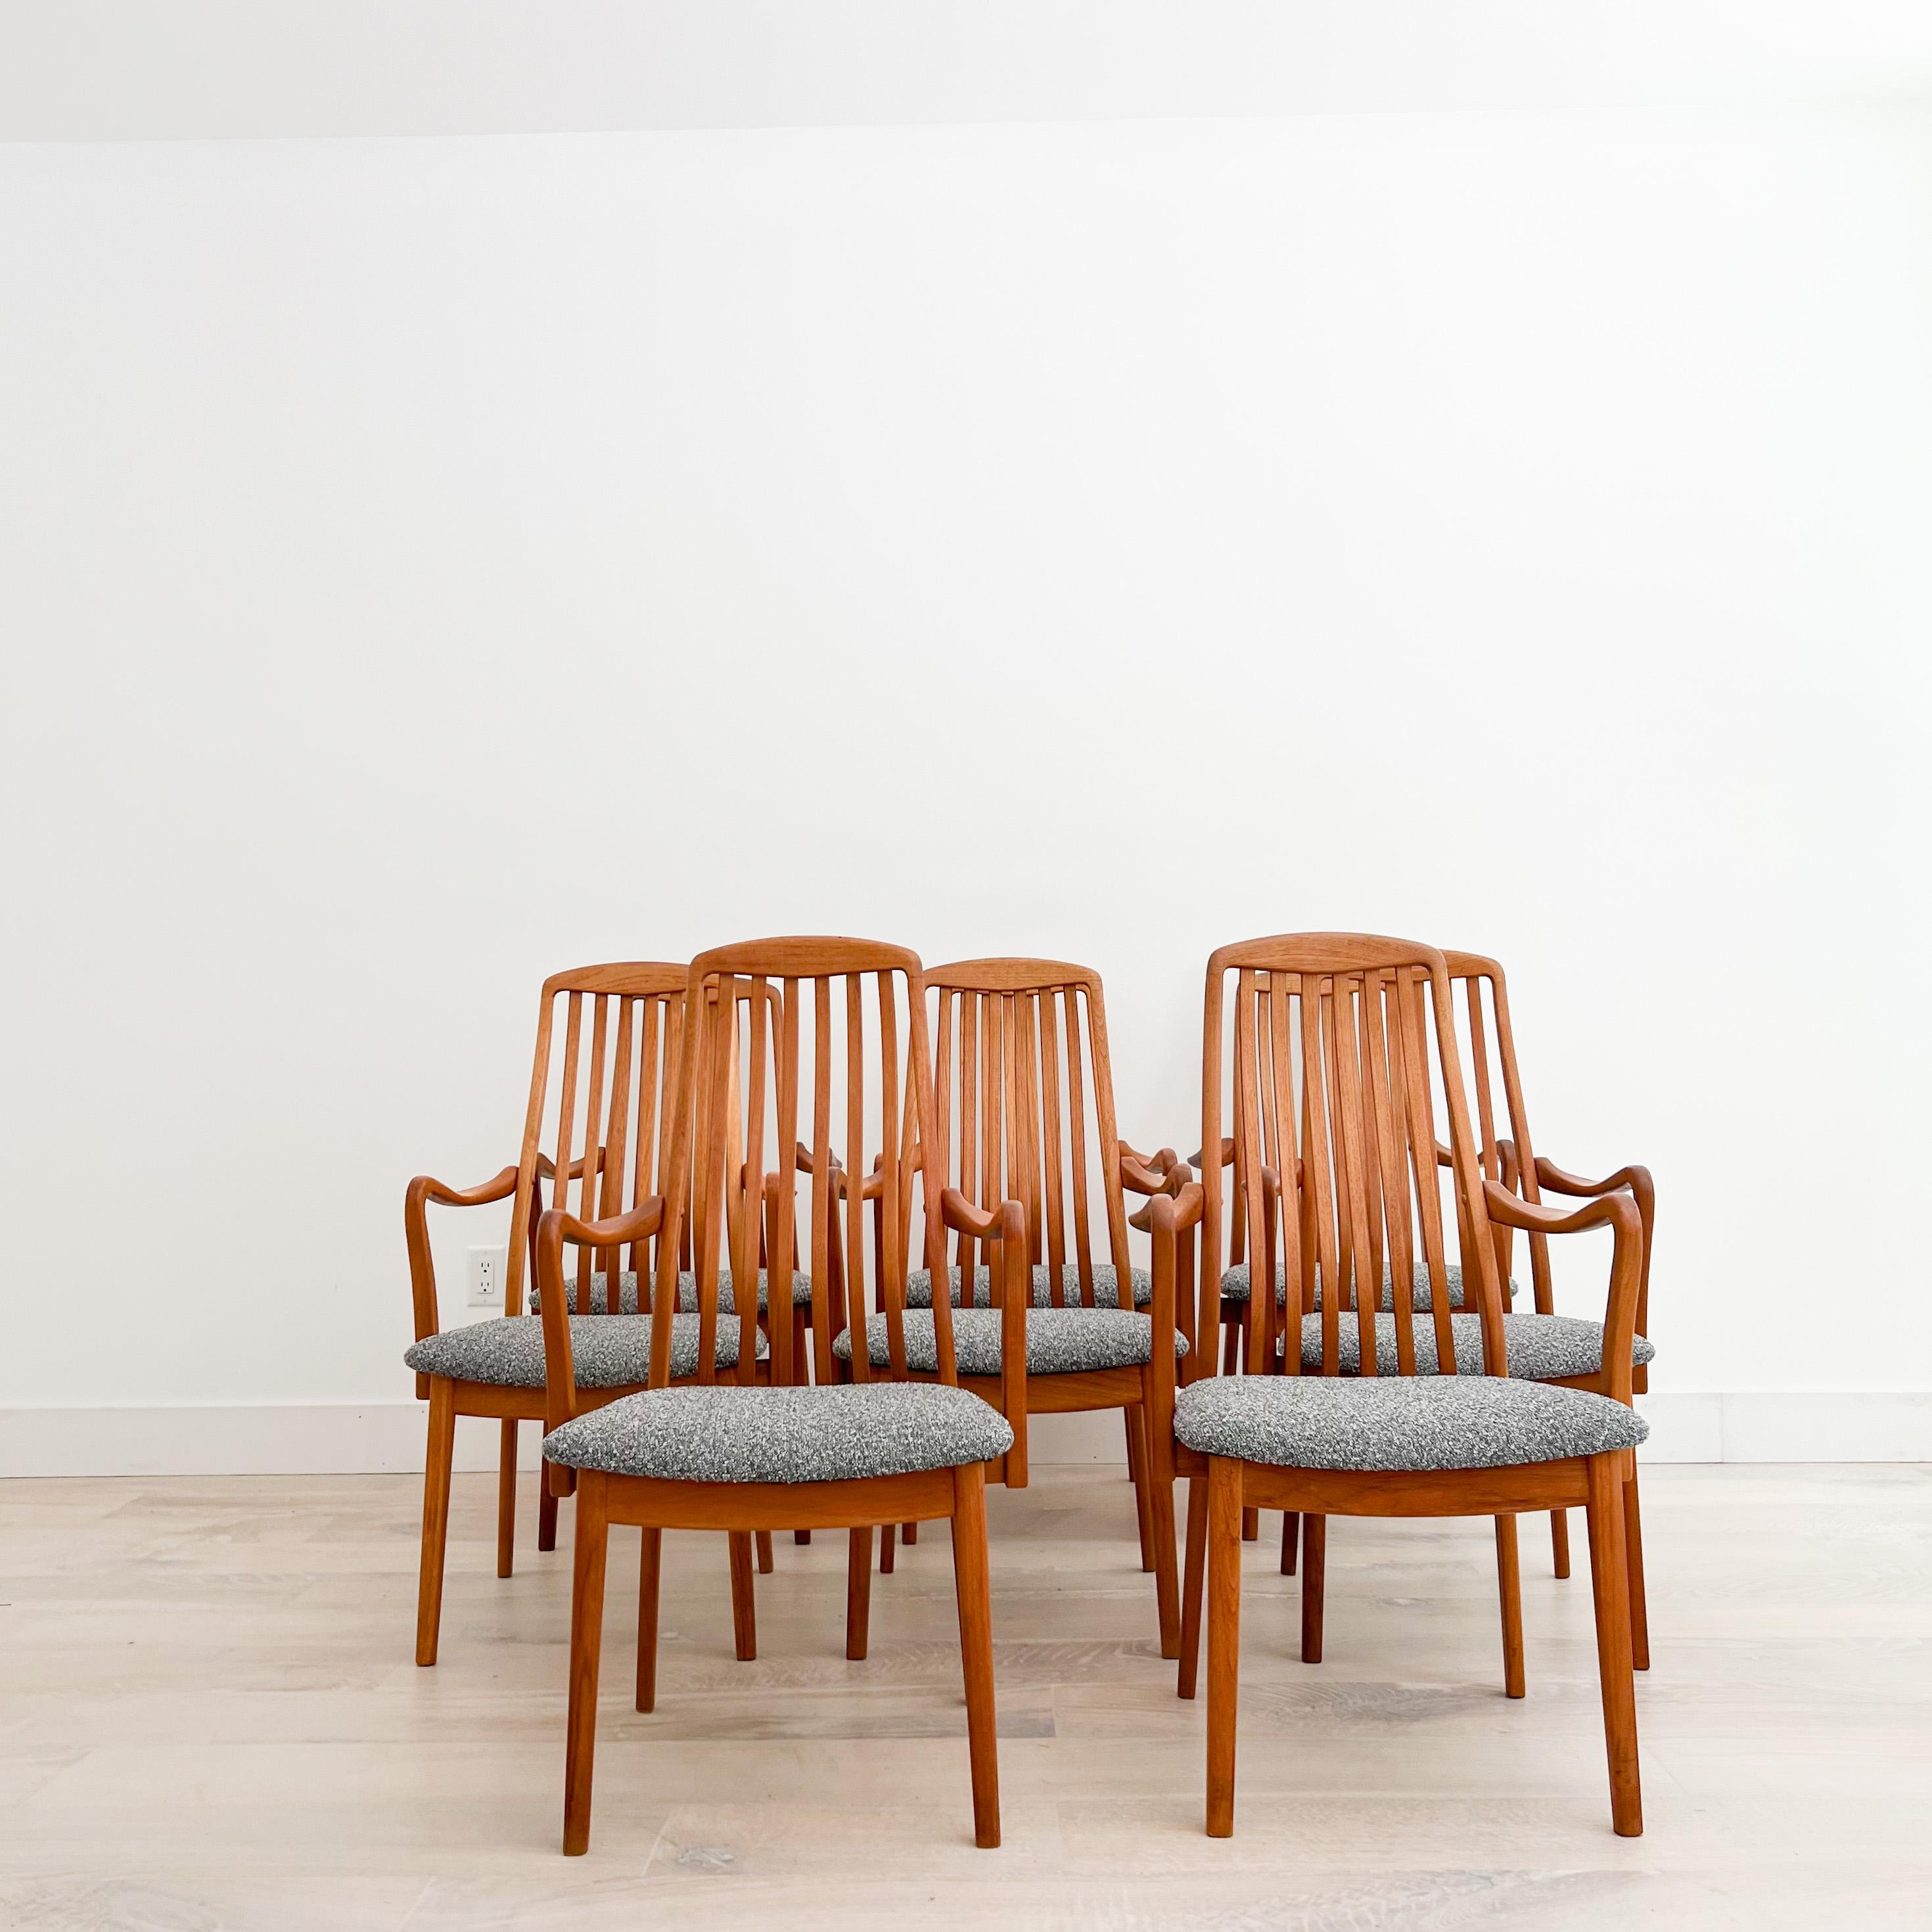 Set of 8 Danish teak dining chairs stamped Virsidan A/S (Aug 1992). These teak slatted back ergonomic frames are very comfortable. Brand new cool toned grey tweed upholstery. Some light scuffing/scratching to the teak. Some chairs frames are a